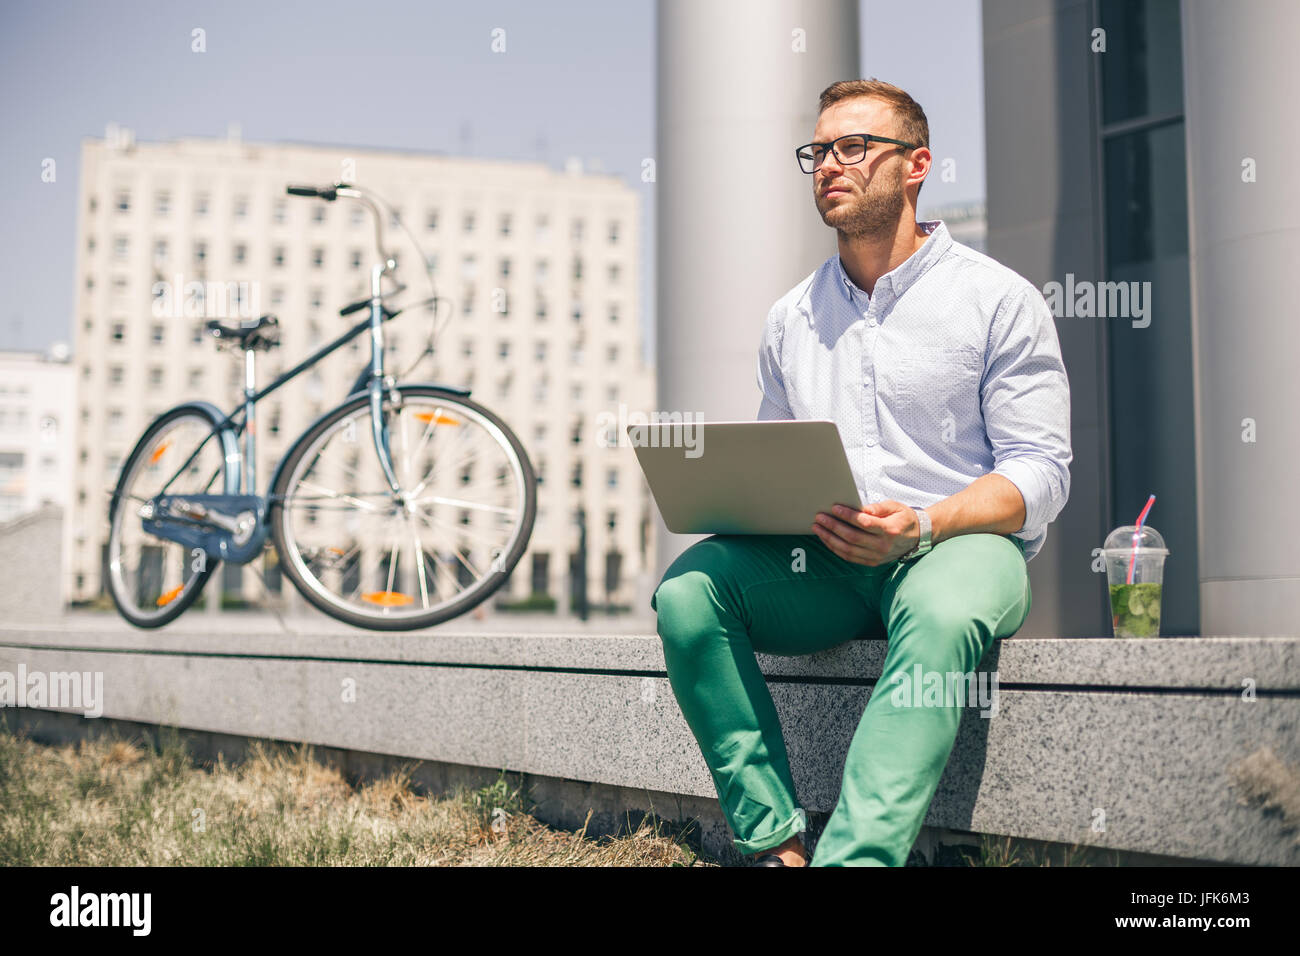 Business man with laptop and sport bike sitting in city. Stock Photo